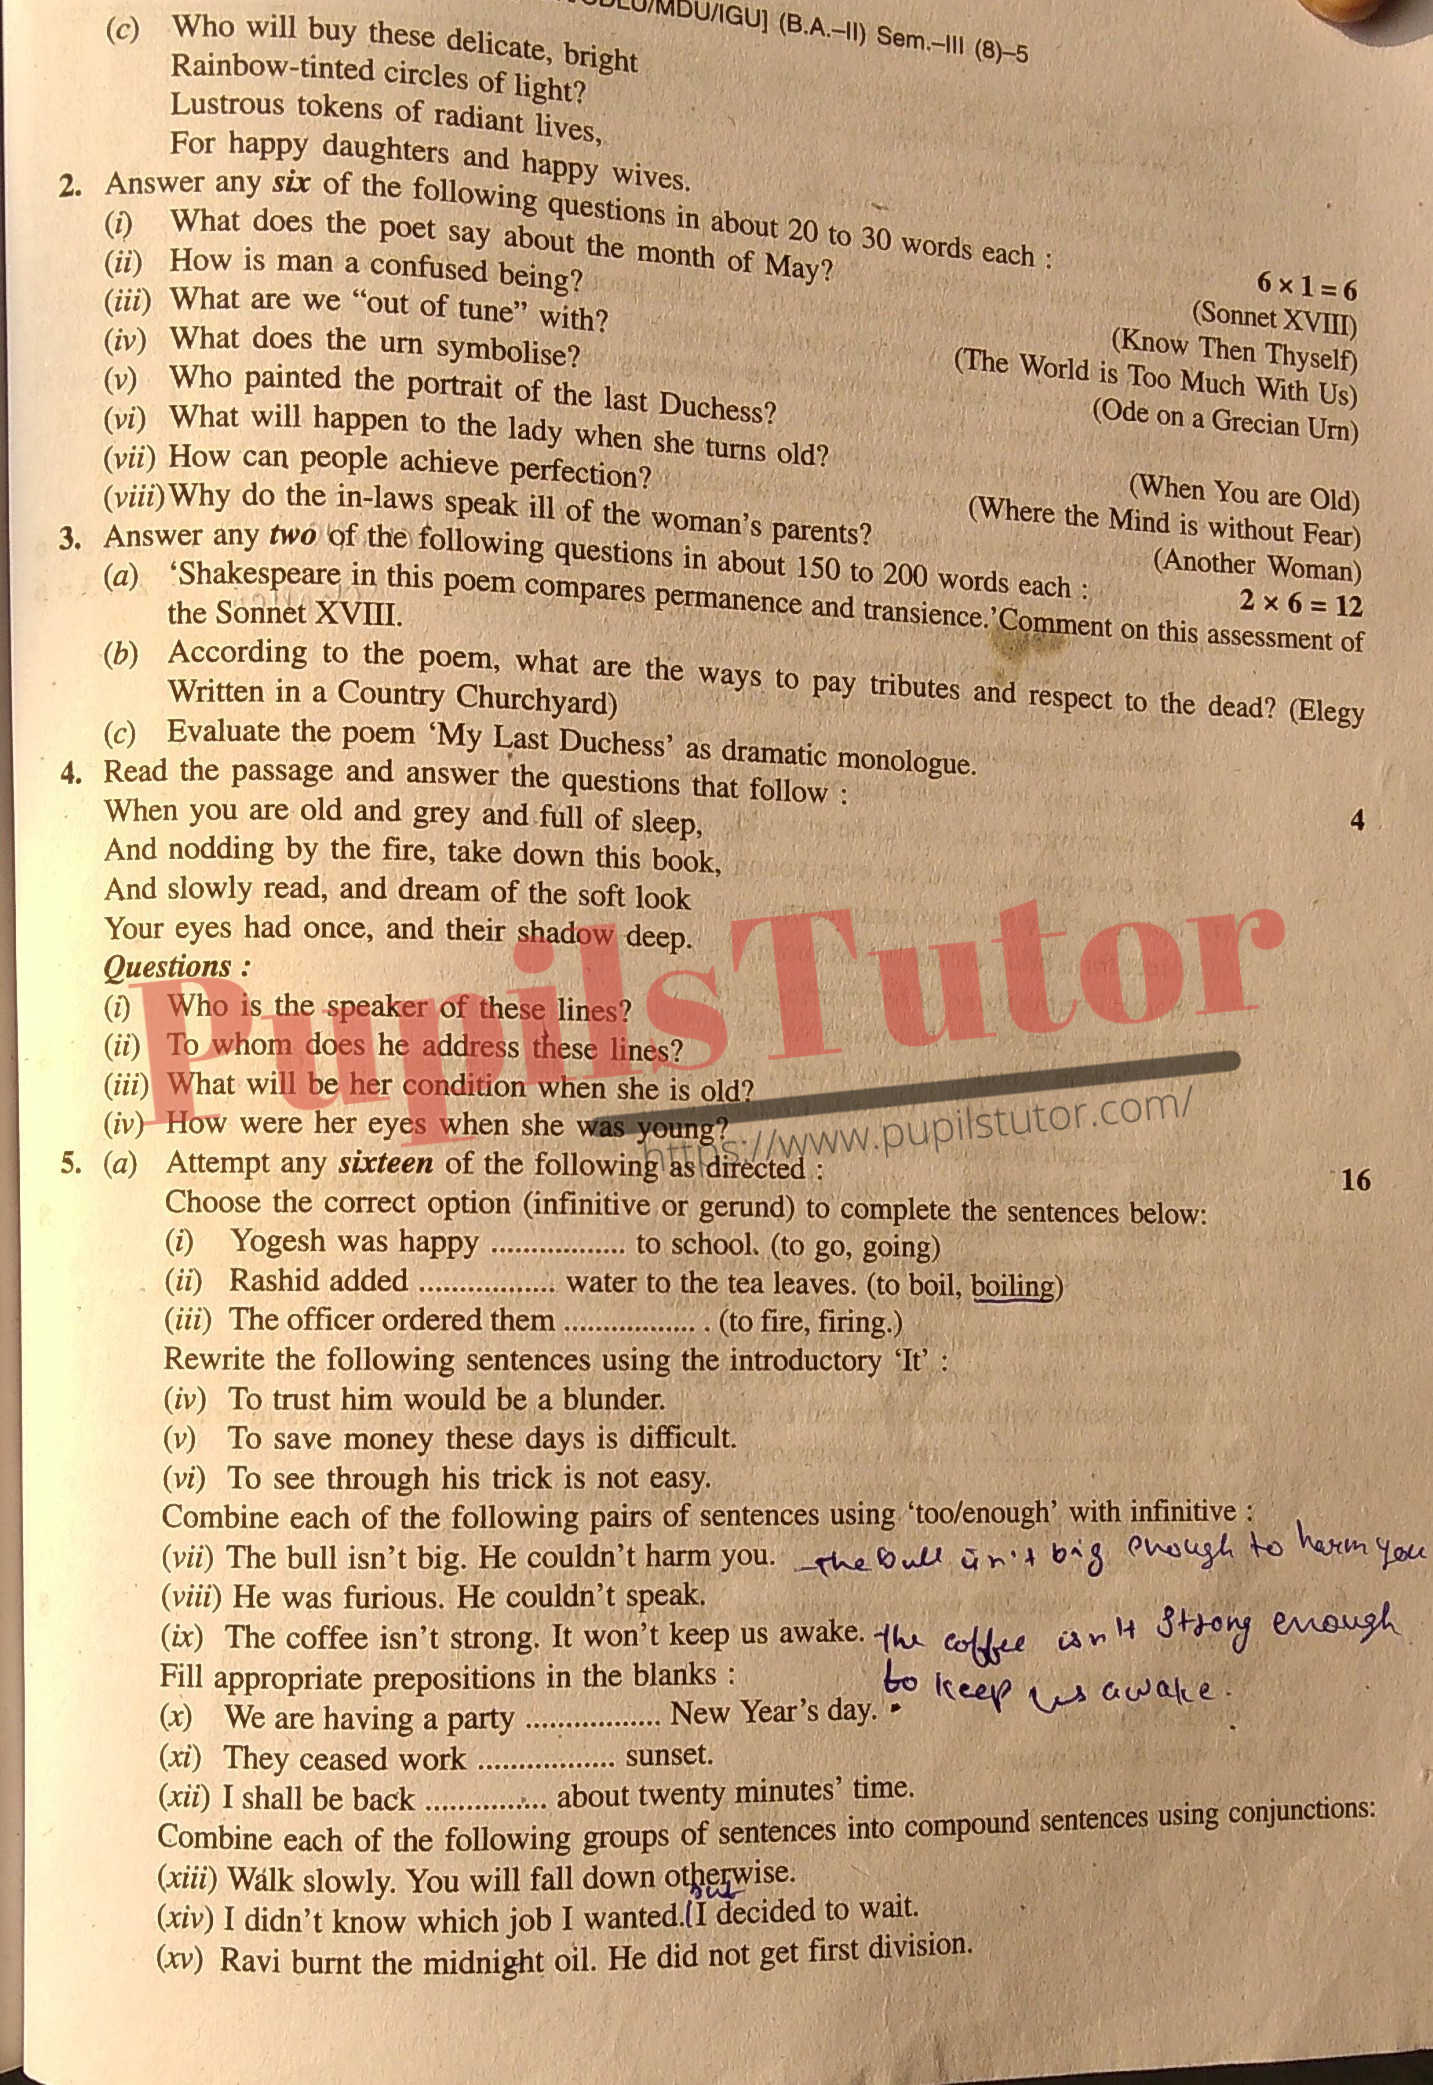 M.D. University B.A. English Third Semester Important Question Answer And Solution - www.pupilstutor.com (Paper Page Number 2)